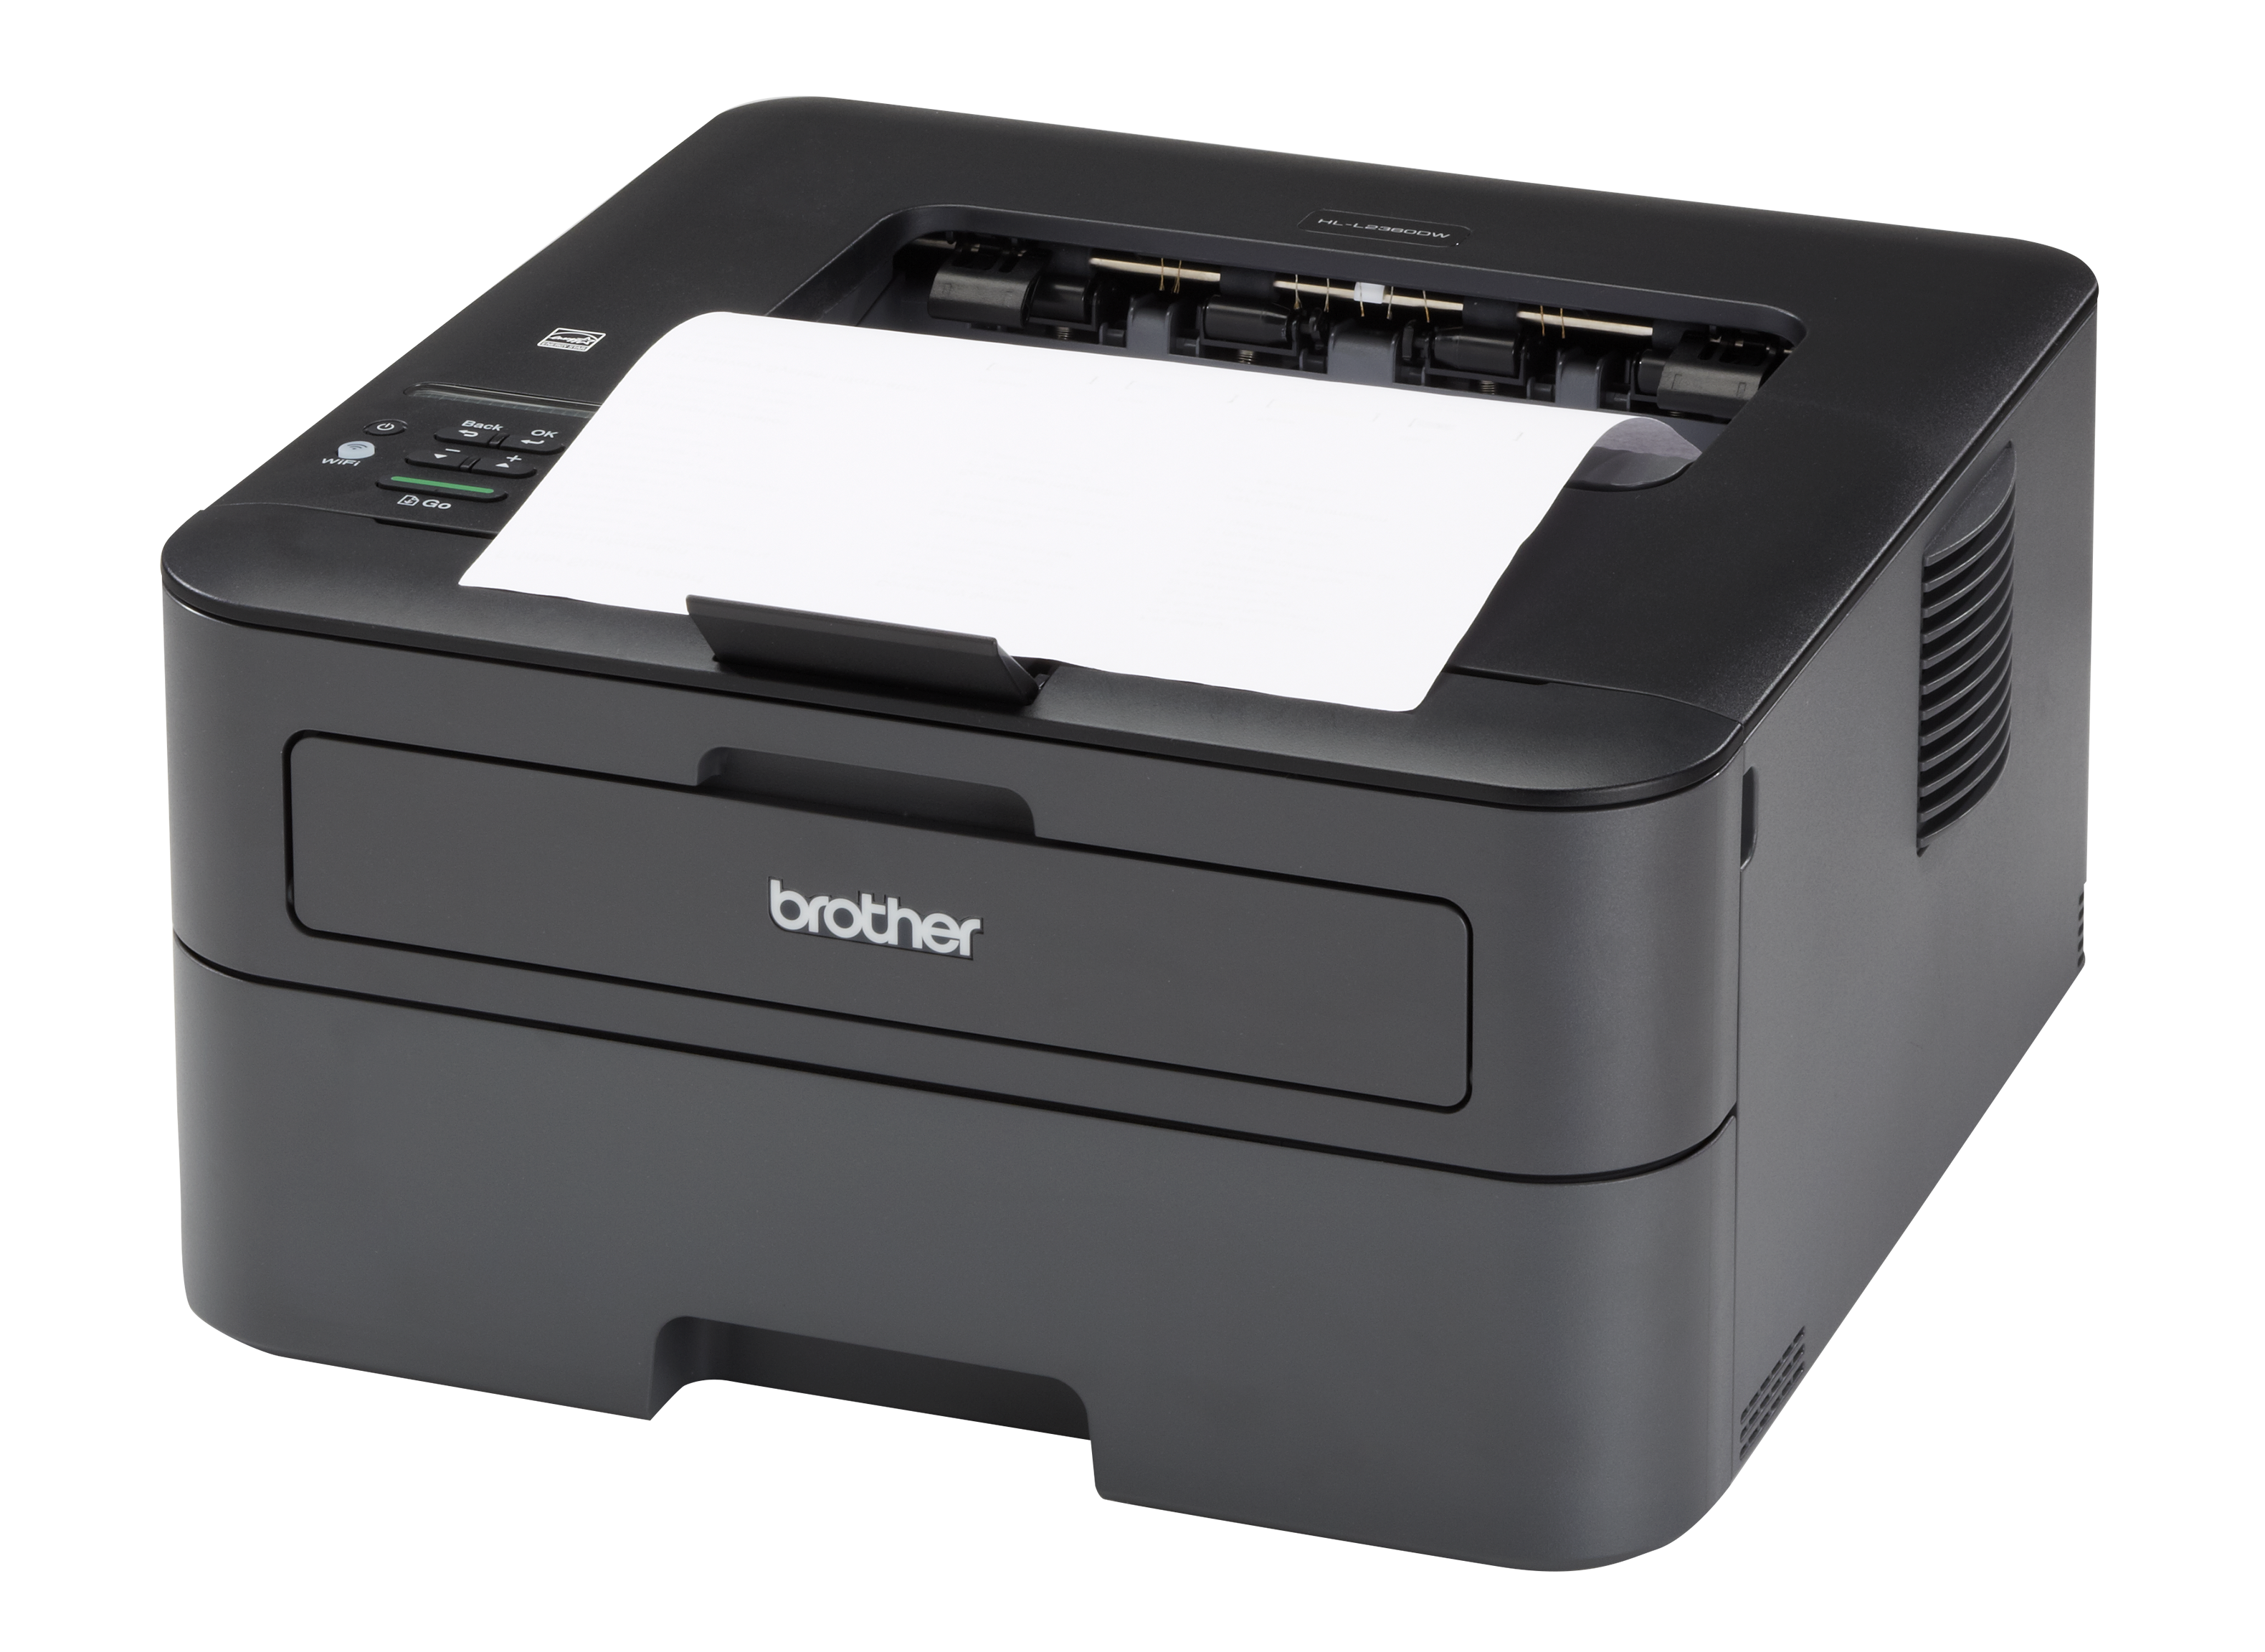 Brother HL-L2360DW review: A simple black laser printer with quick prints  and a future-proof design - CNET